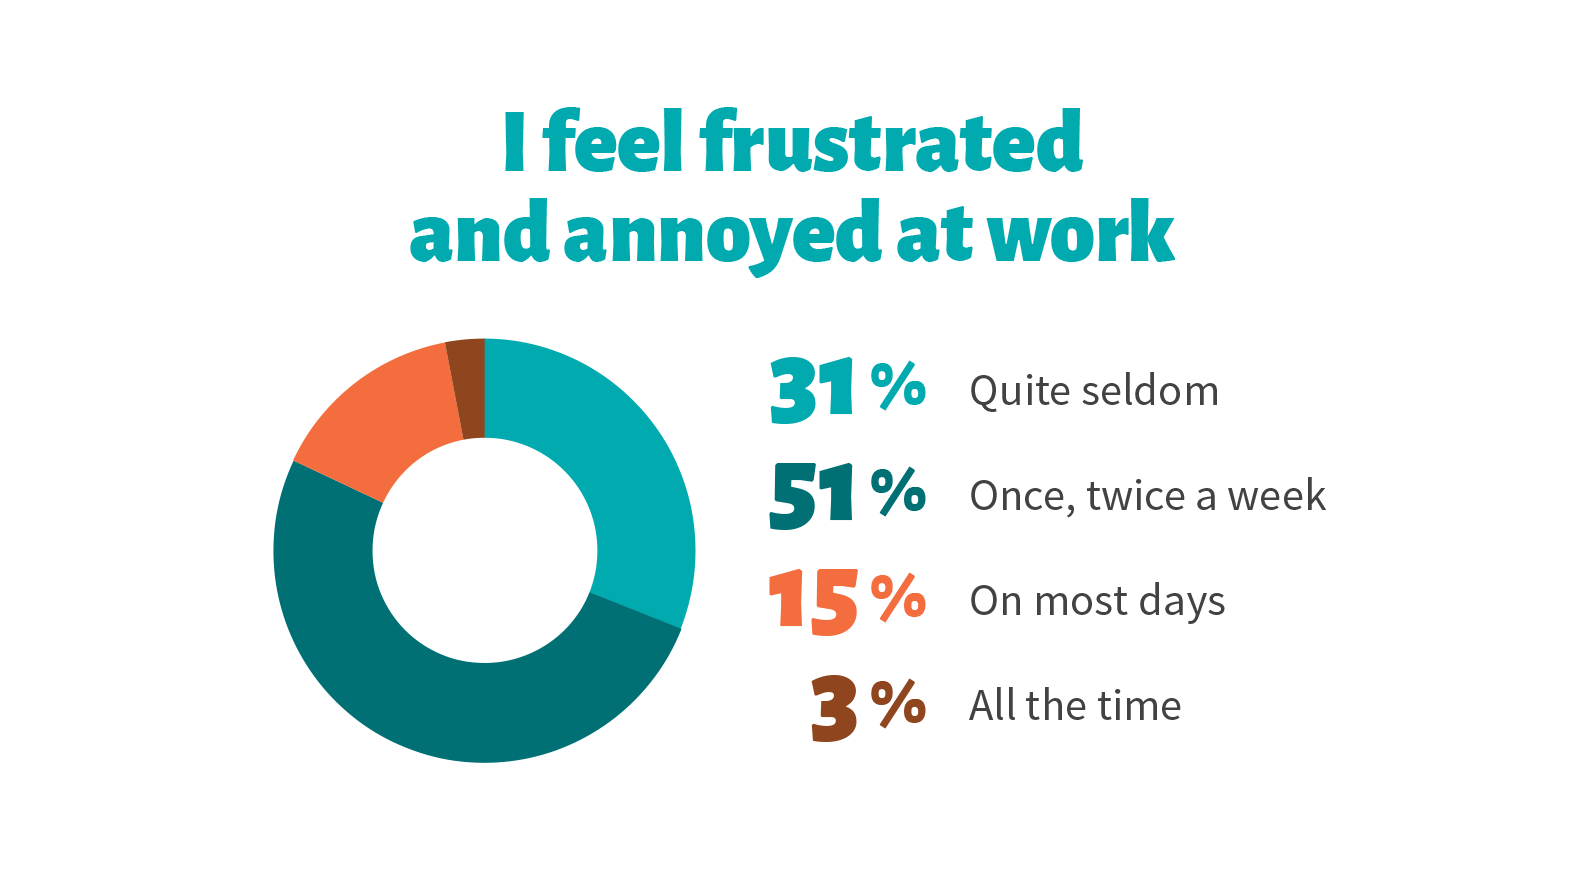 Graph that tells: I feel frustrated and annoyed at work quite seldom (31 %), once, twice a week (51 %), on most days (15 %), all the time (3 %).